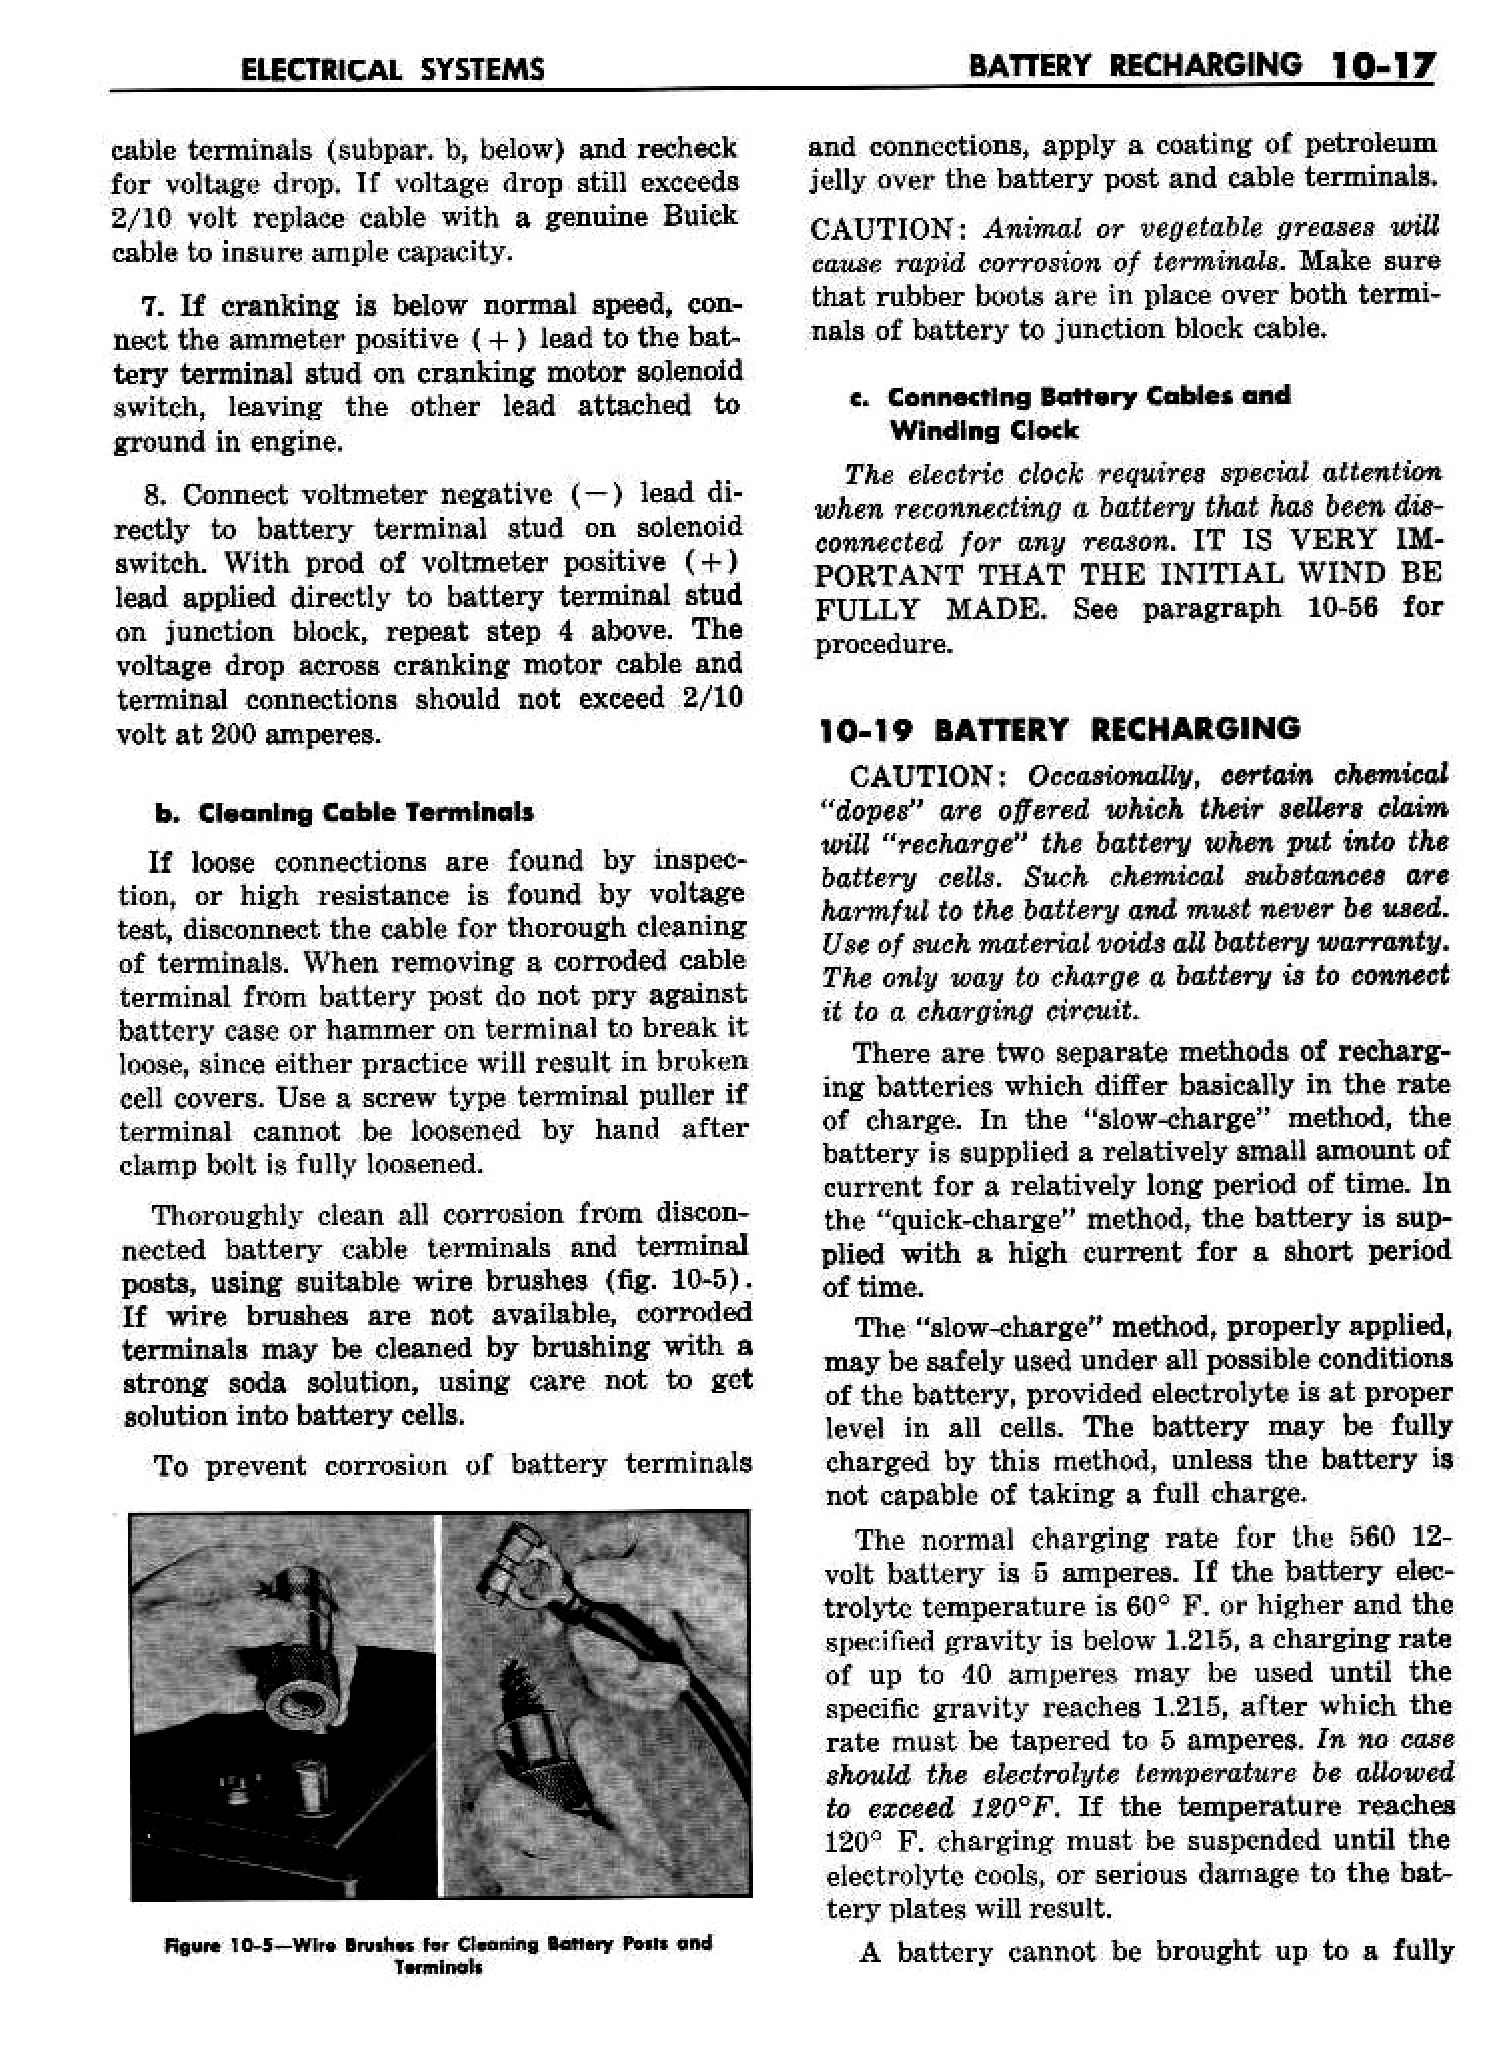 n_11 1958 Buick Shop Manual - Electrical Systems_17.jpg